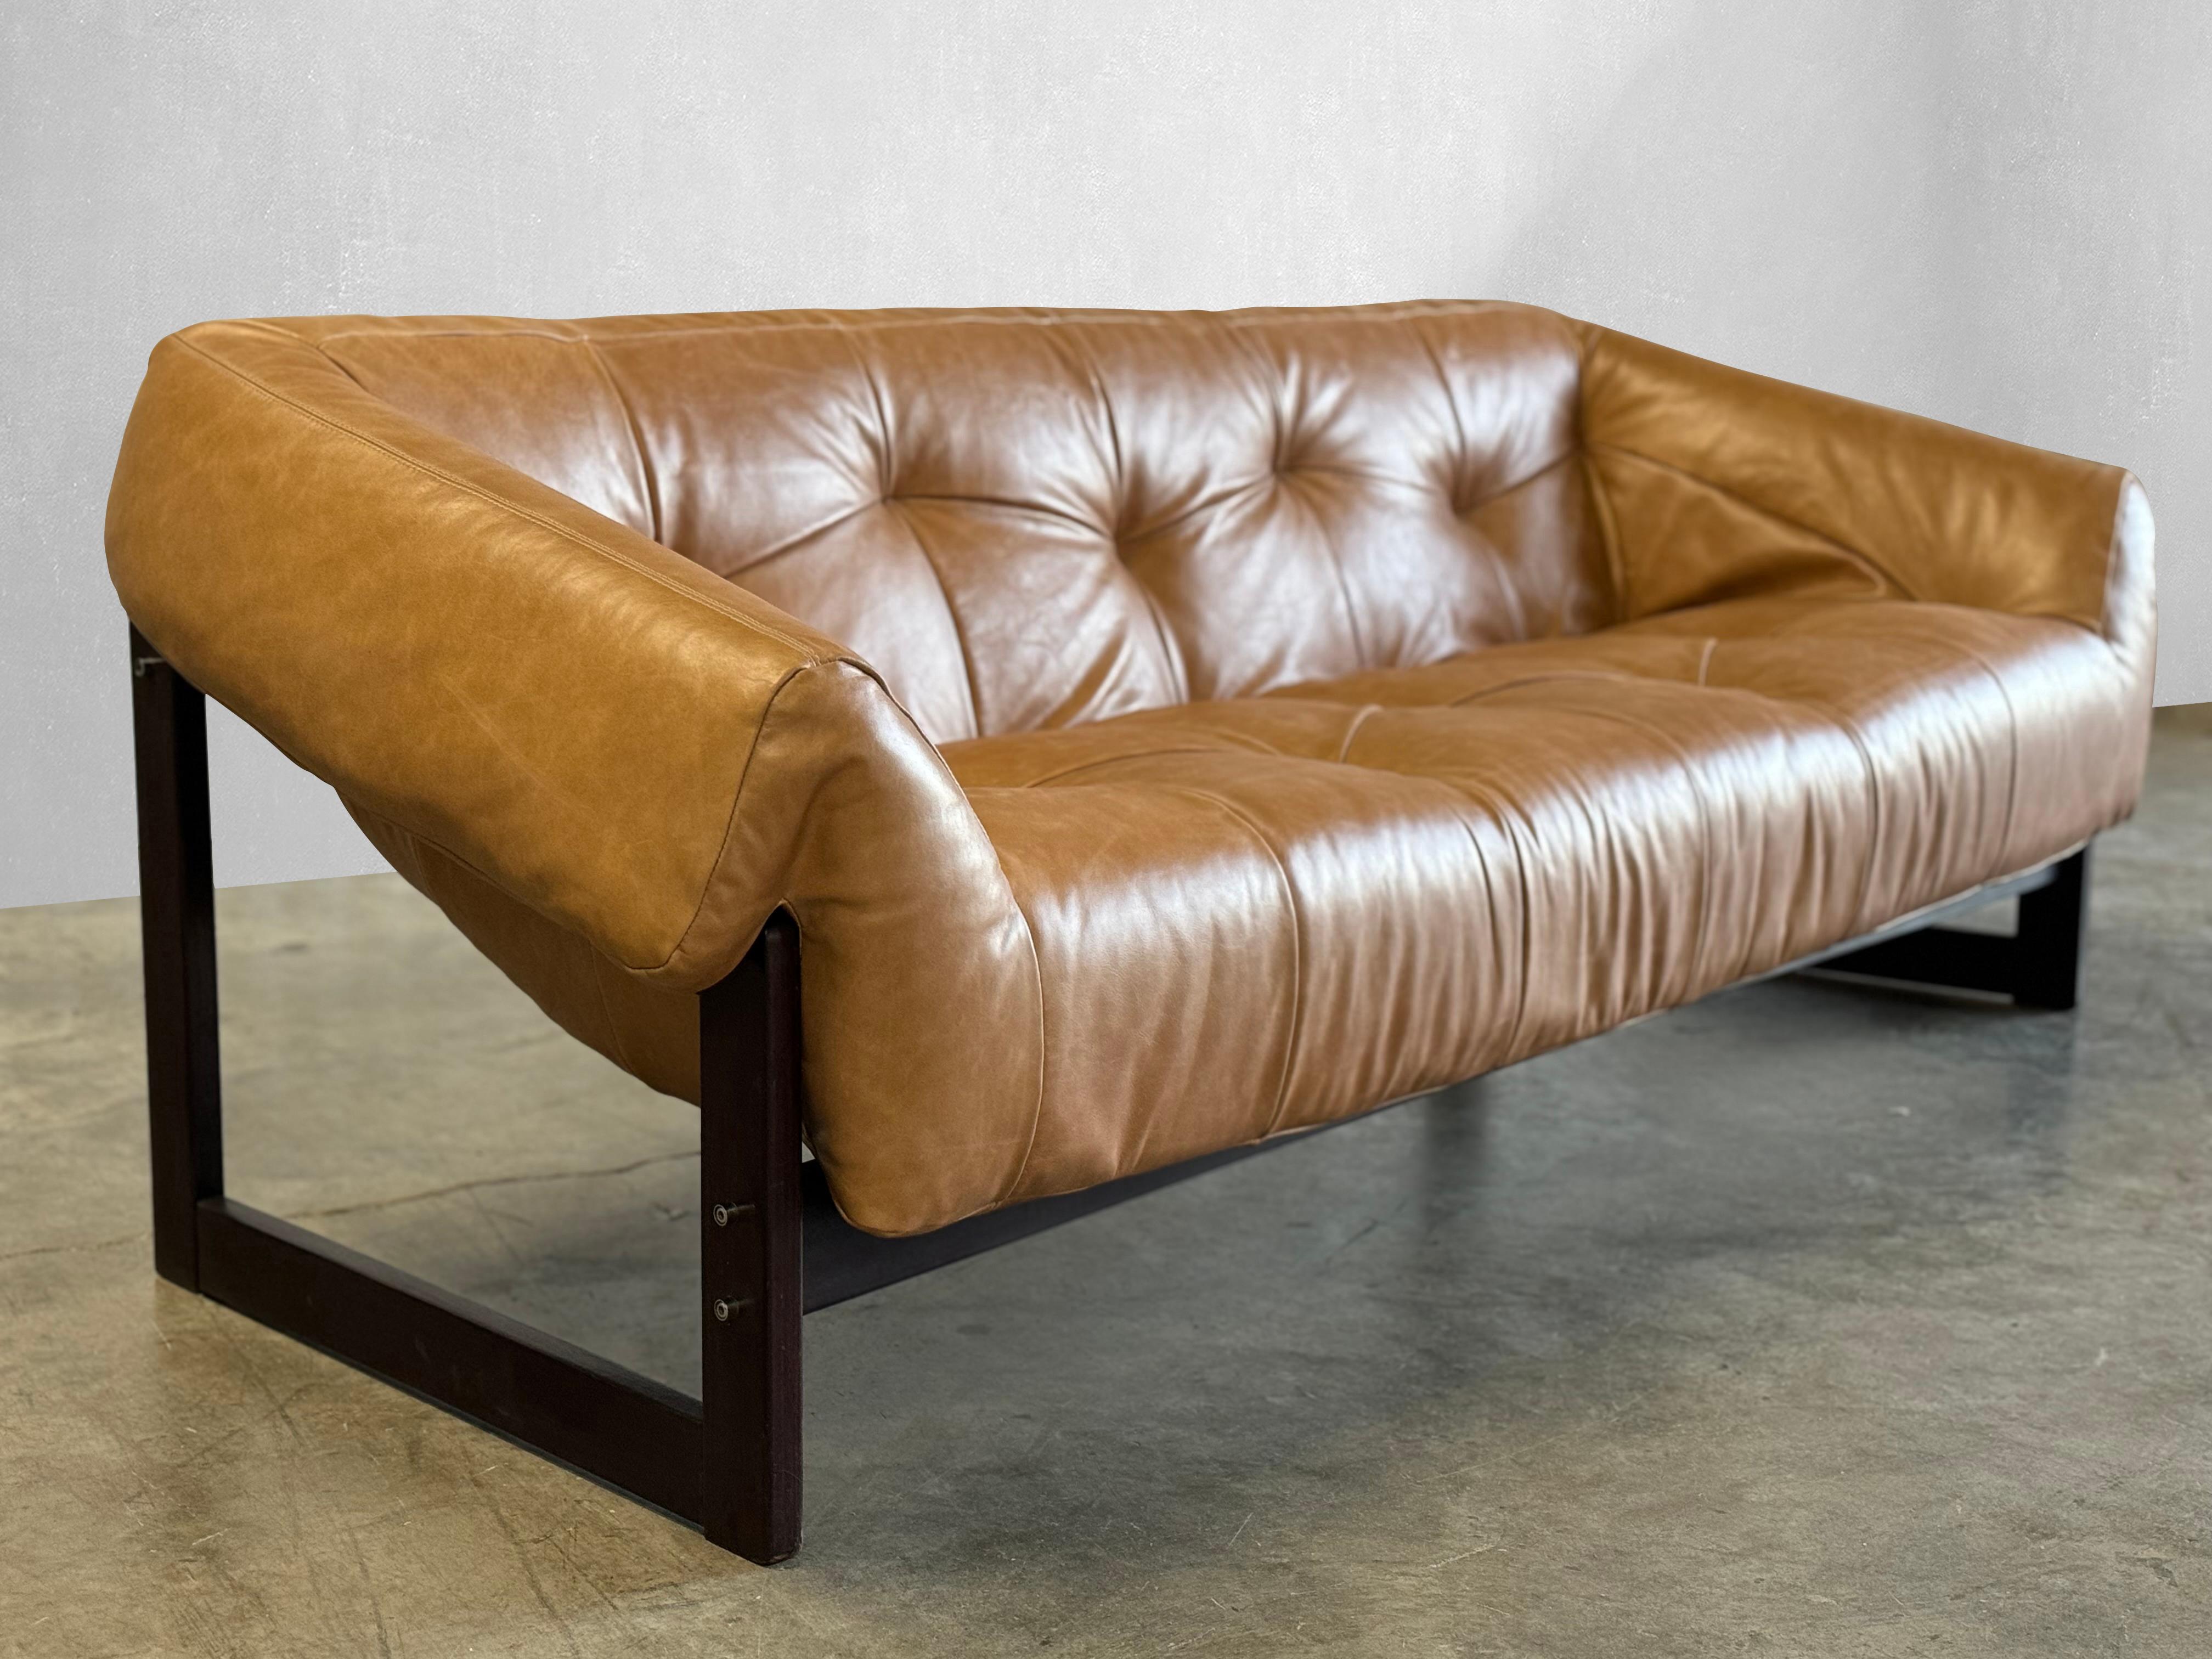 Leather Percival Lafer MP-79 Sofa For Sale